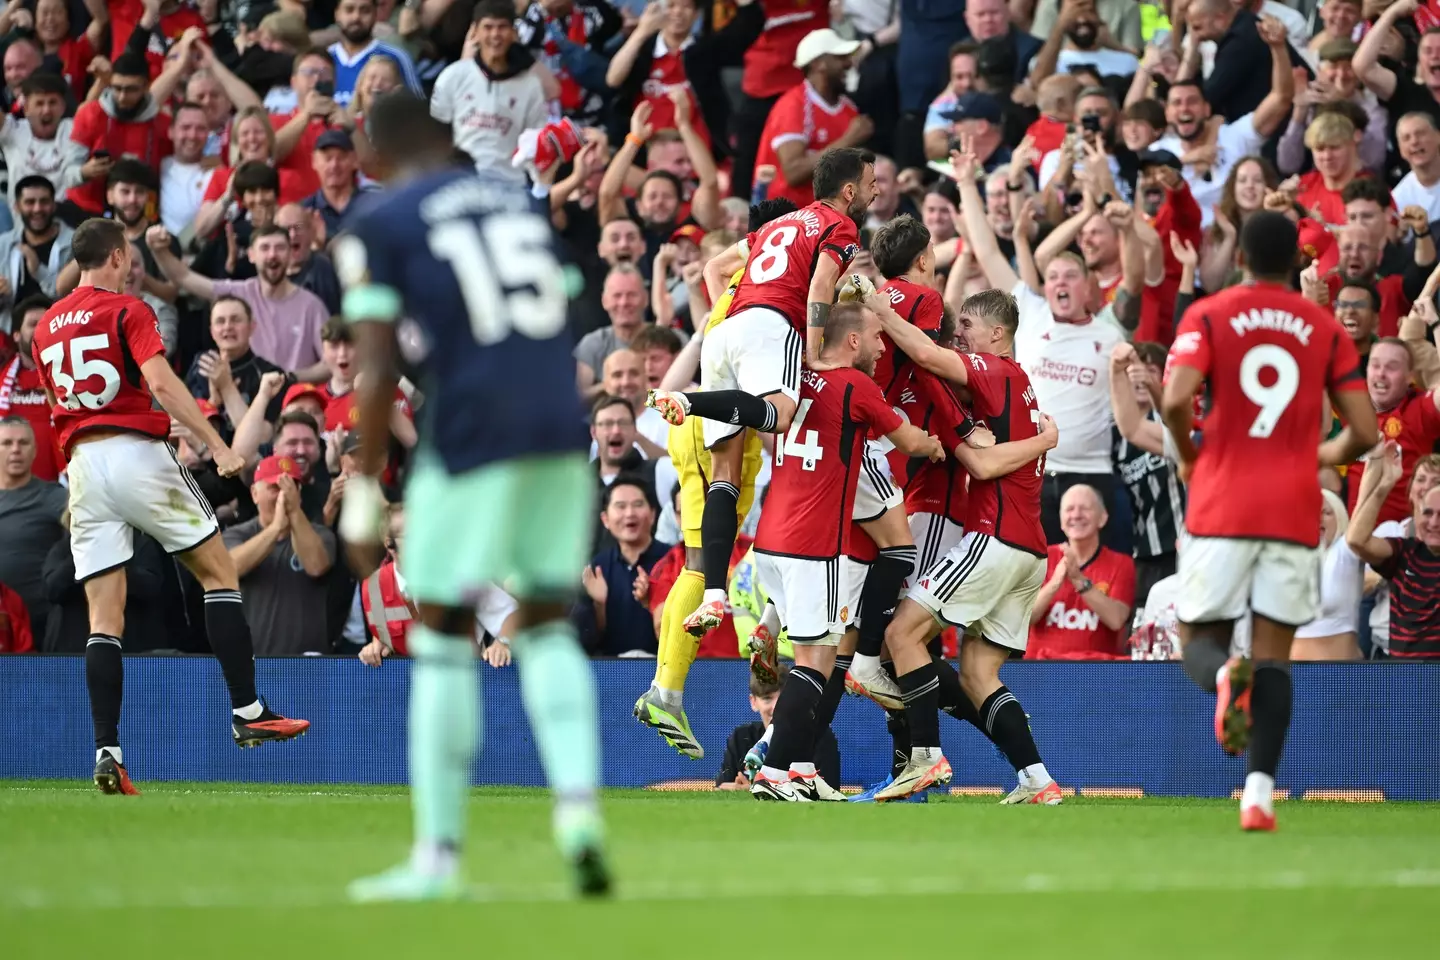 Manchester United celebrate scoring their second goal. Image: Getty 